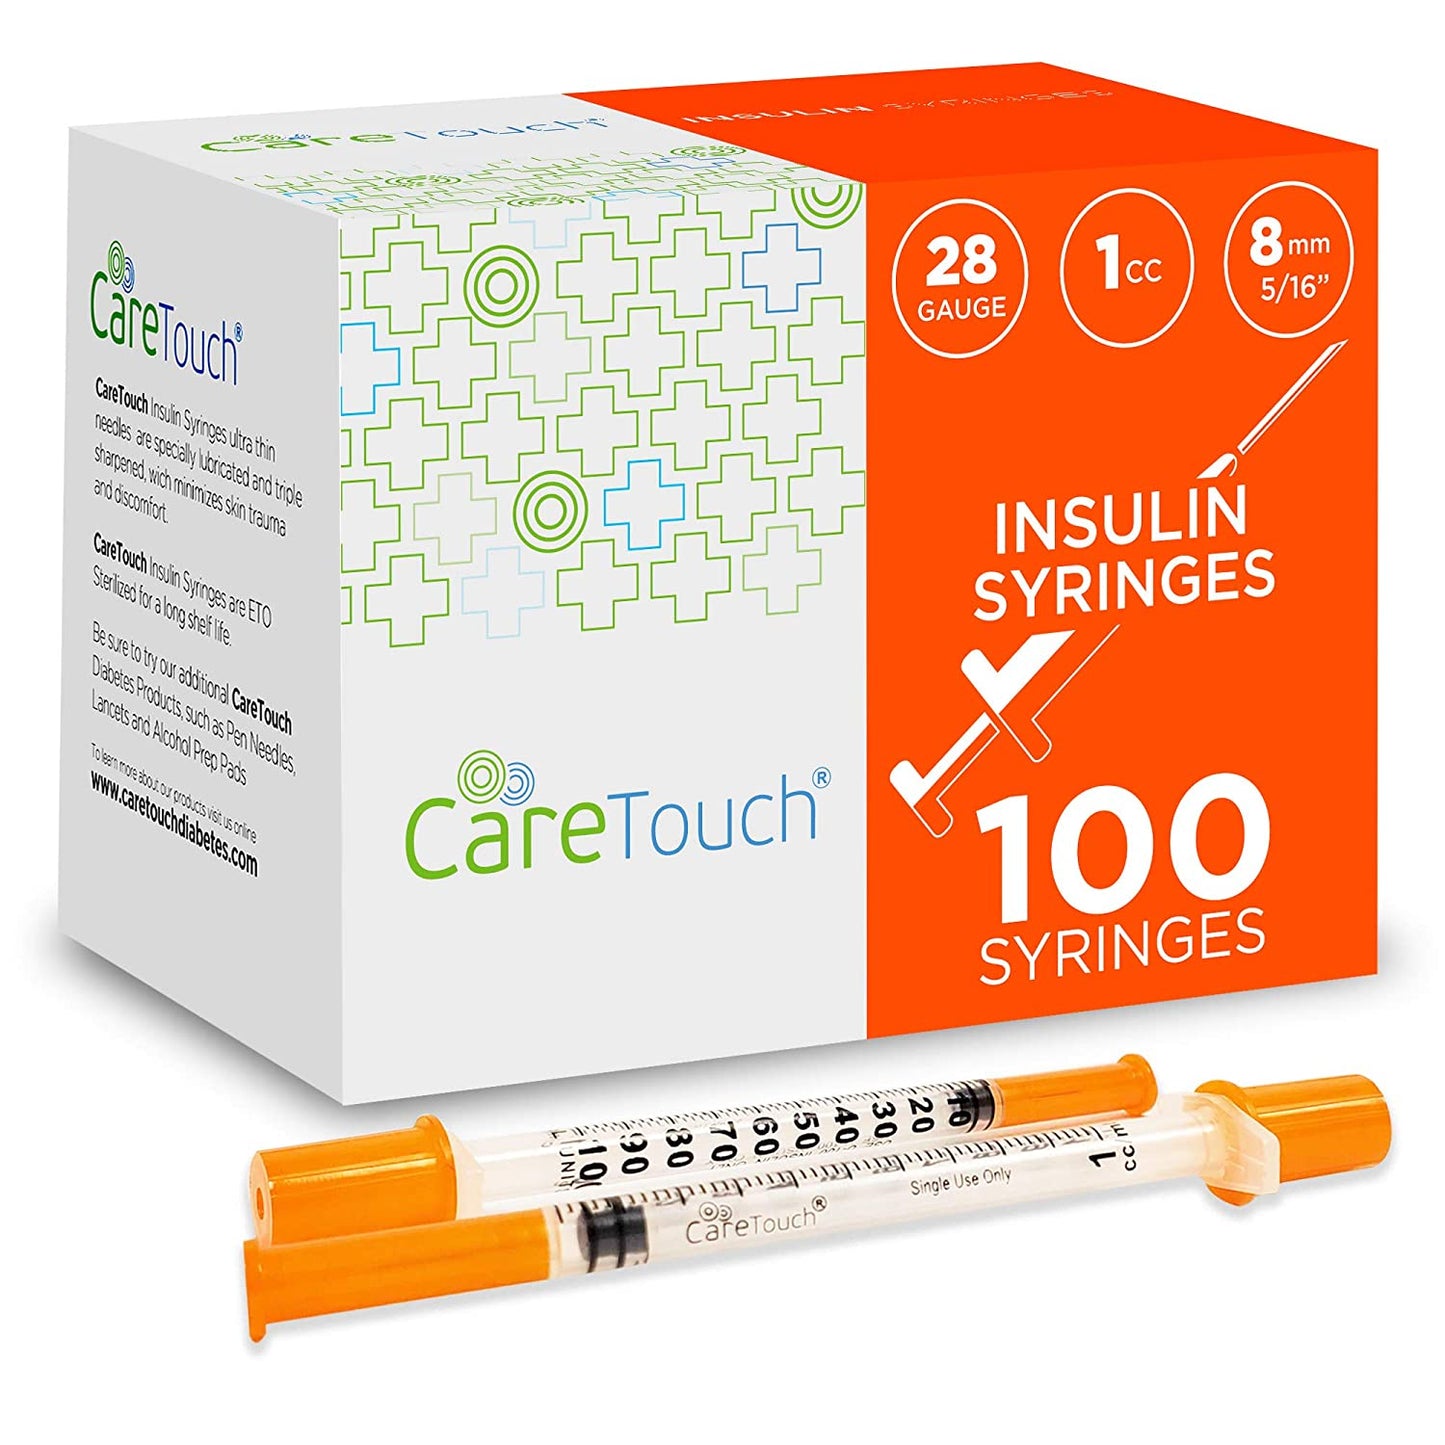 Care Touch Insulin Syringe 28g 5/16" - 1cc (Case of 5 units)